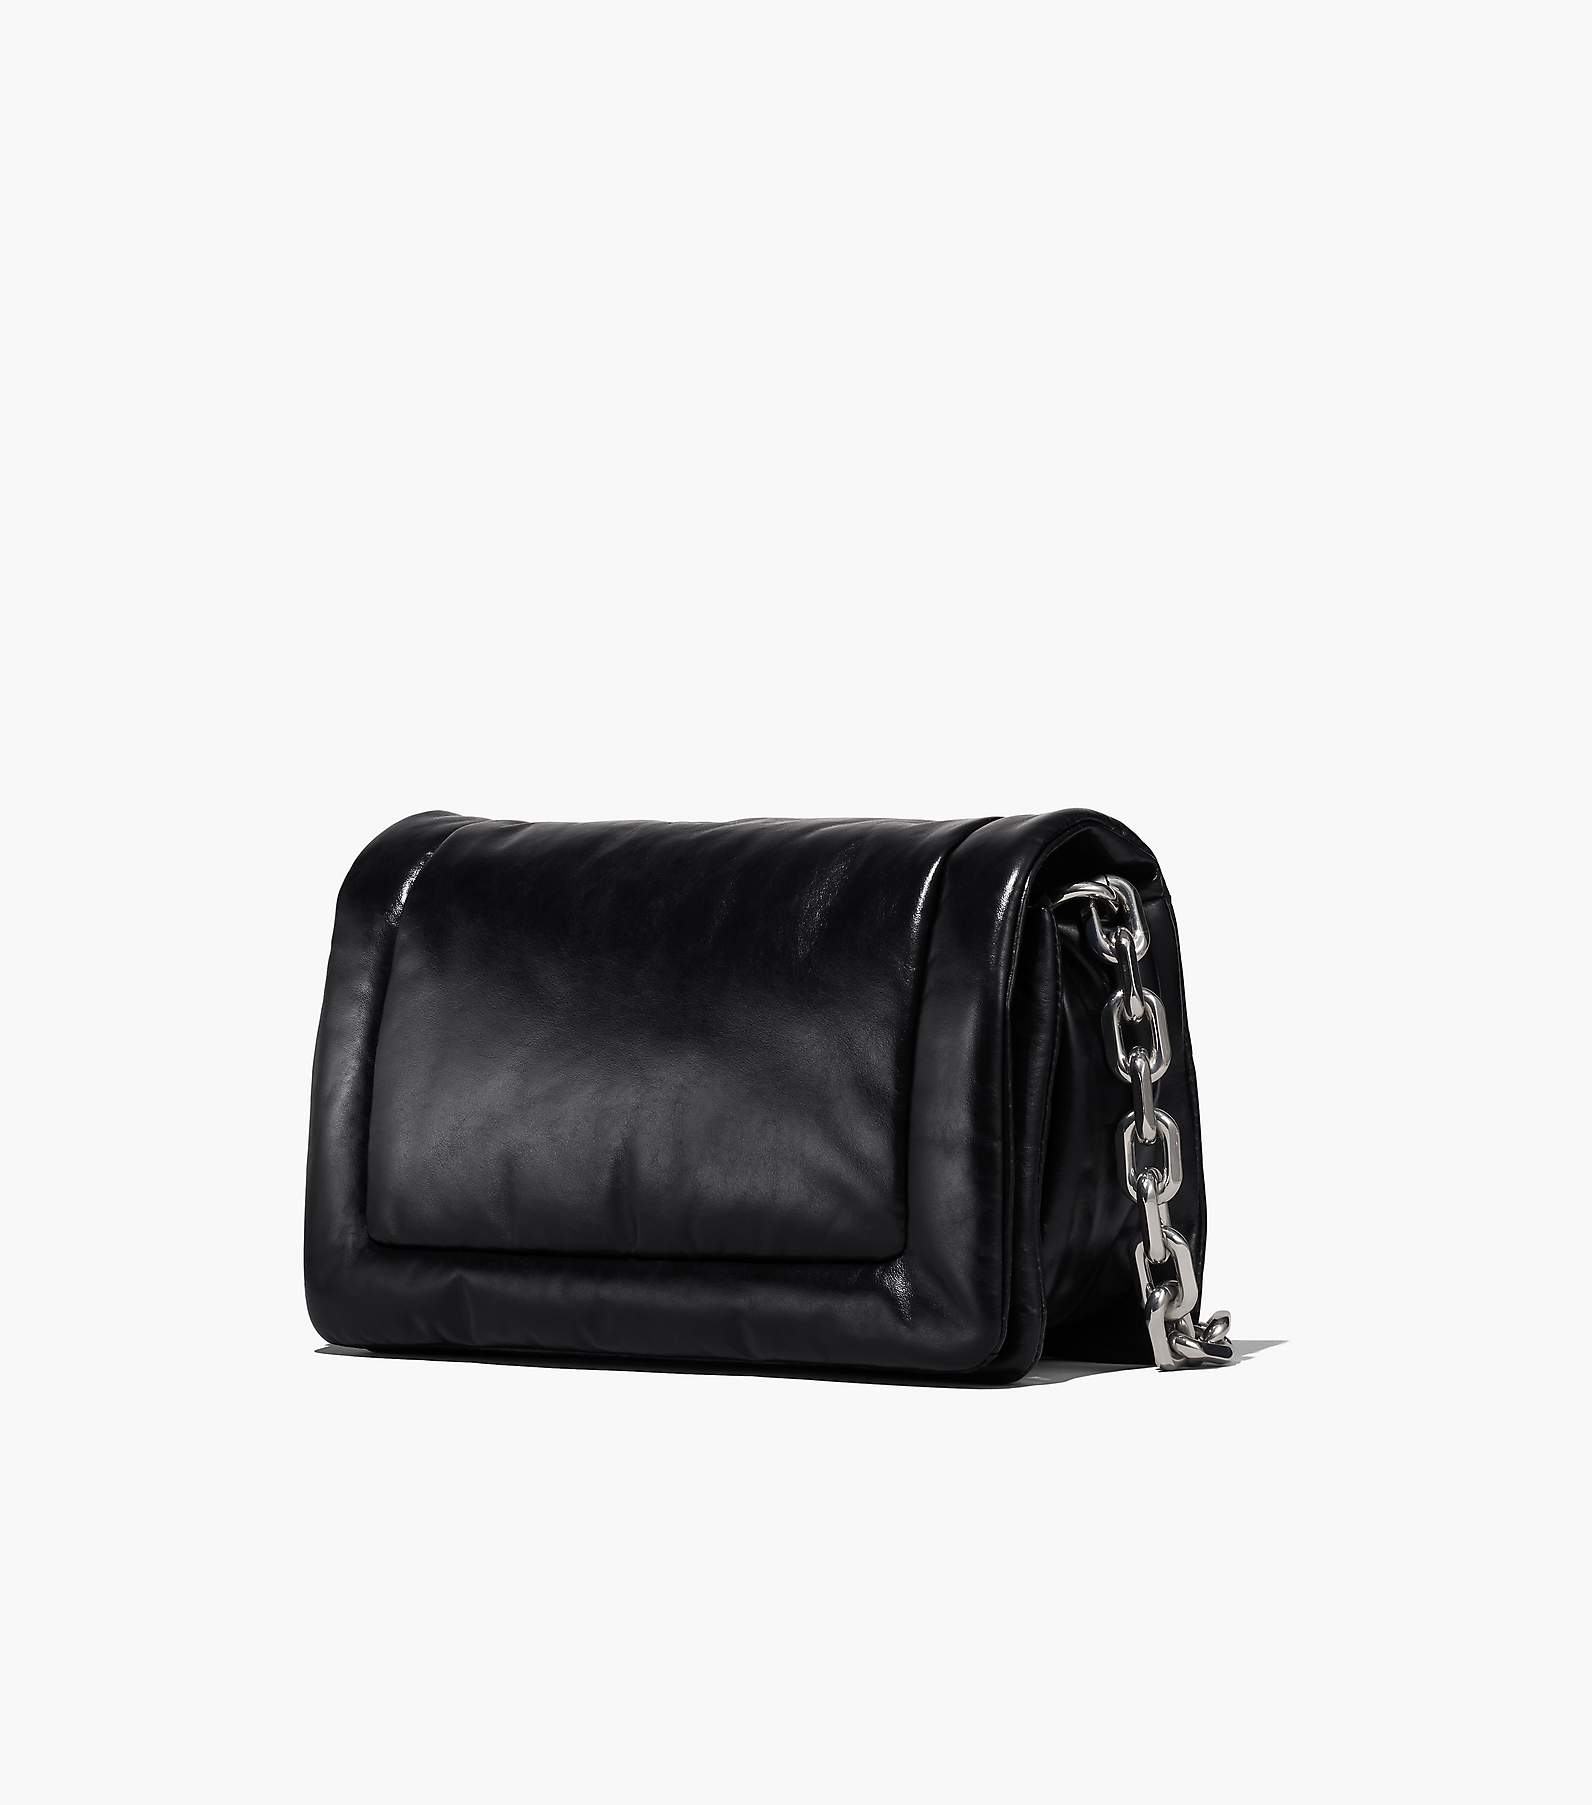 Marc Jacobs, Bags, Marc Jacobs Pillow Bag Nwt